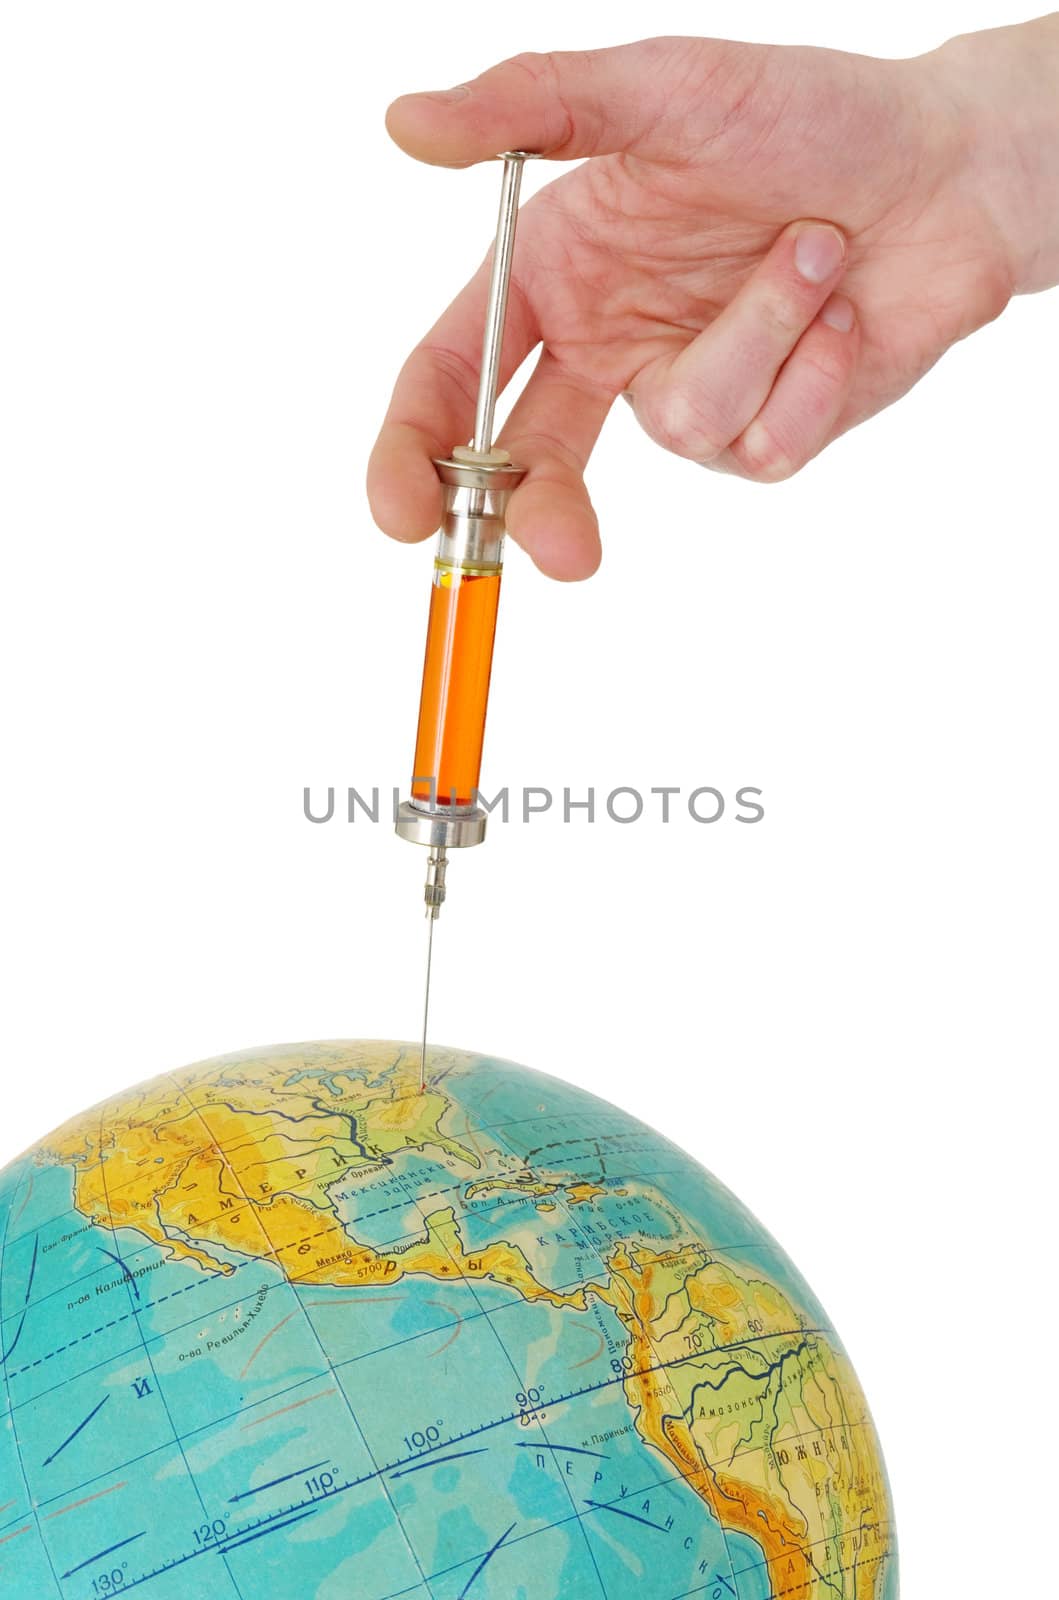 Syringe and terrestrial globe by pzaxe